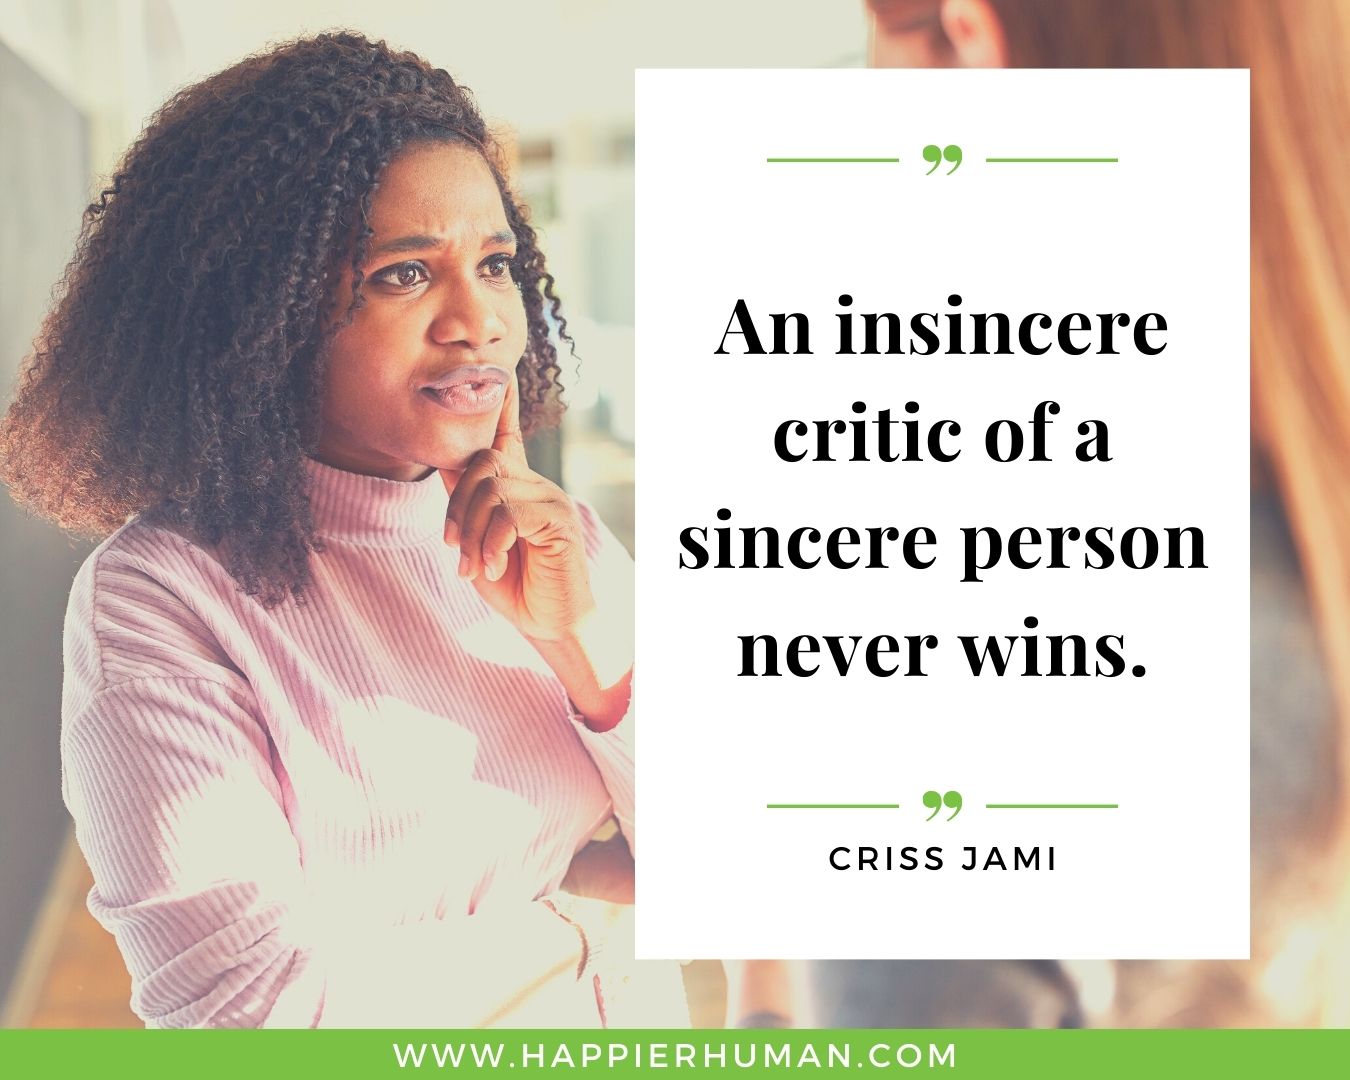 Haters Quotes - “An insincere critic of a sincere person never wins.” - Criss Jami